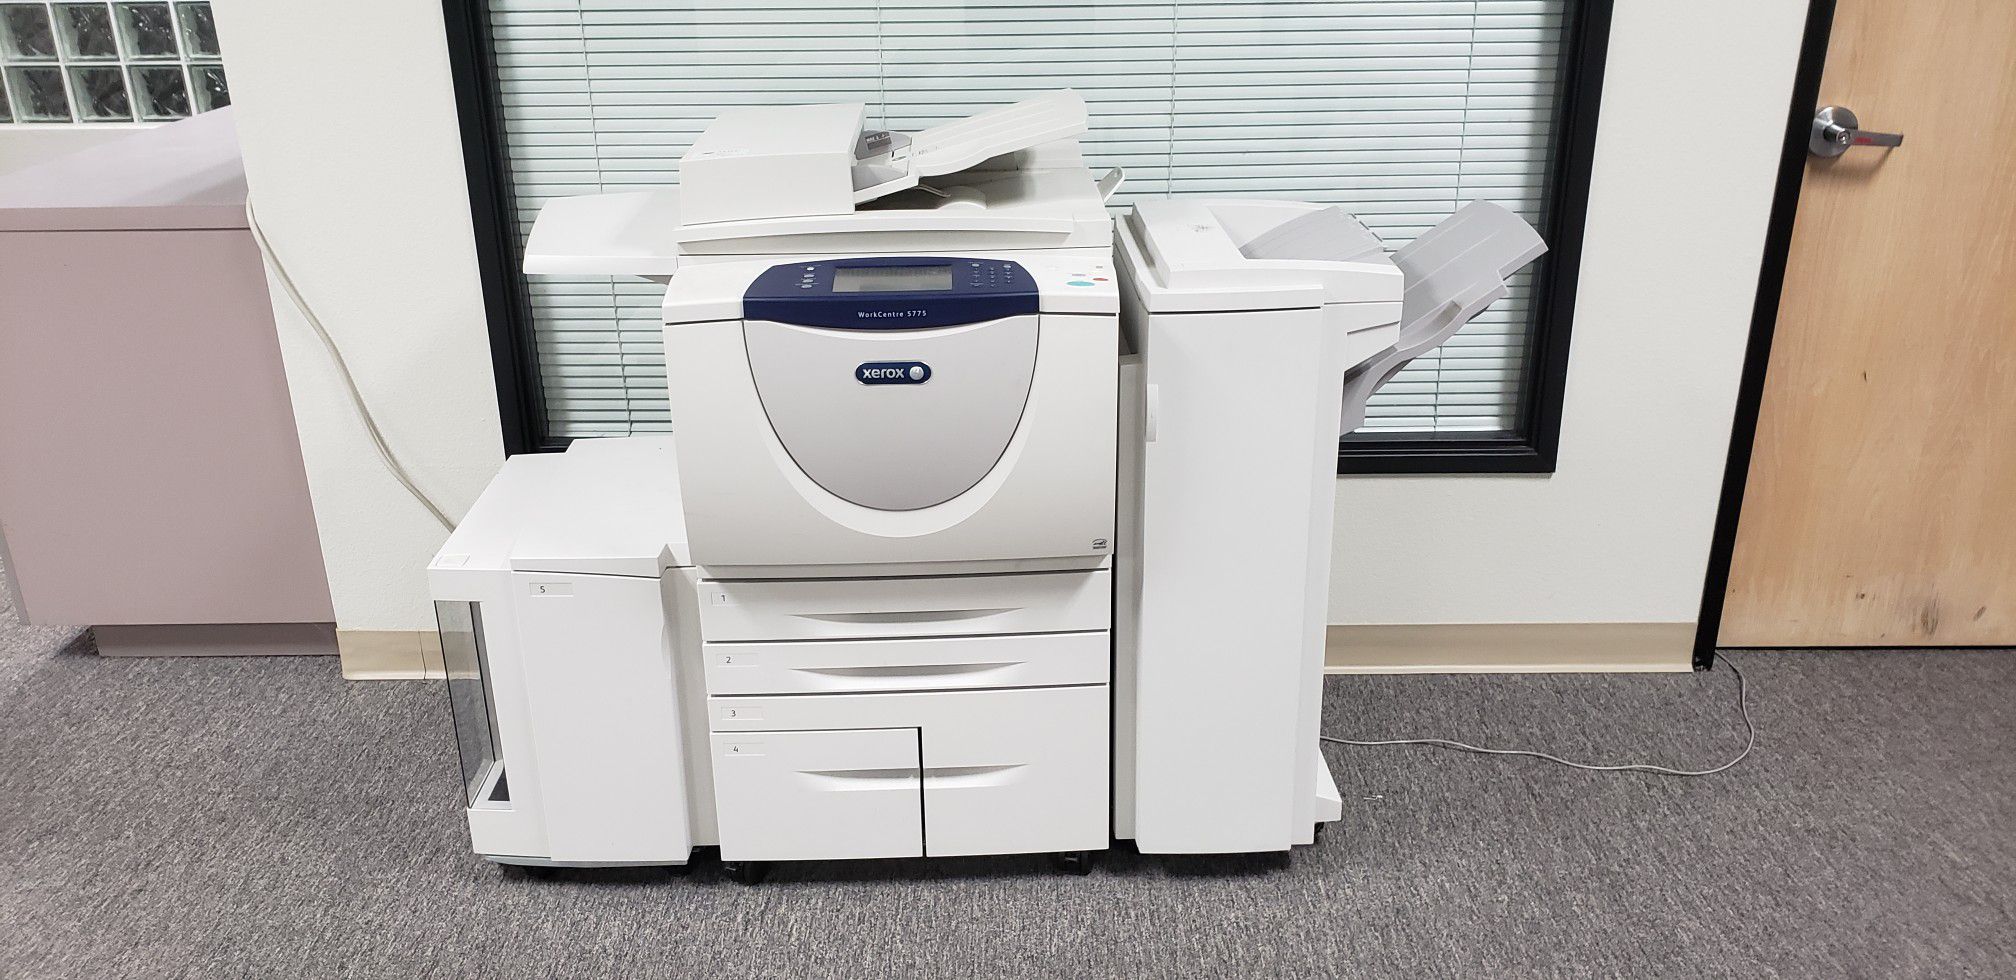 Xerox Workcentre 5775 Mono MFP Printer Scanner Copier with Fax Finisher 75 PPM